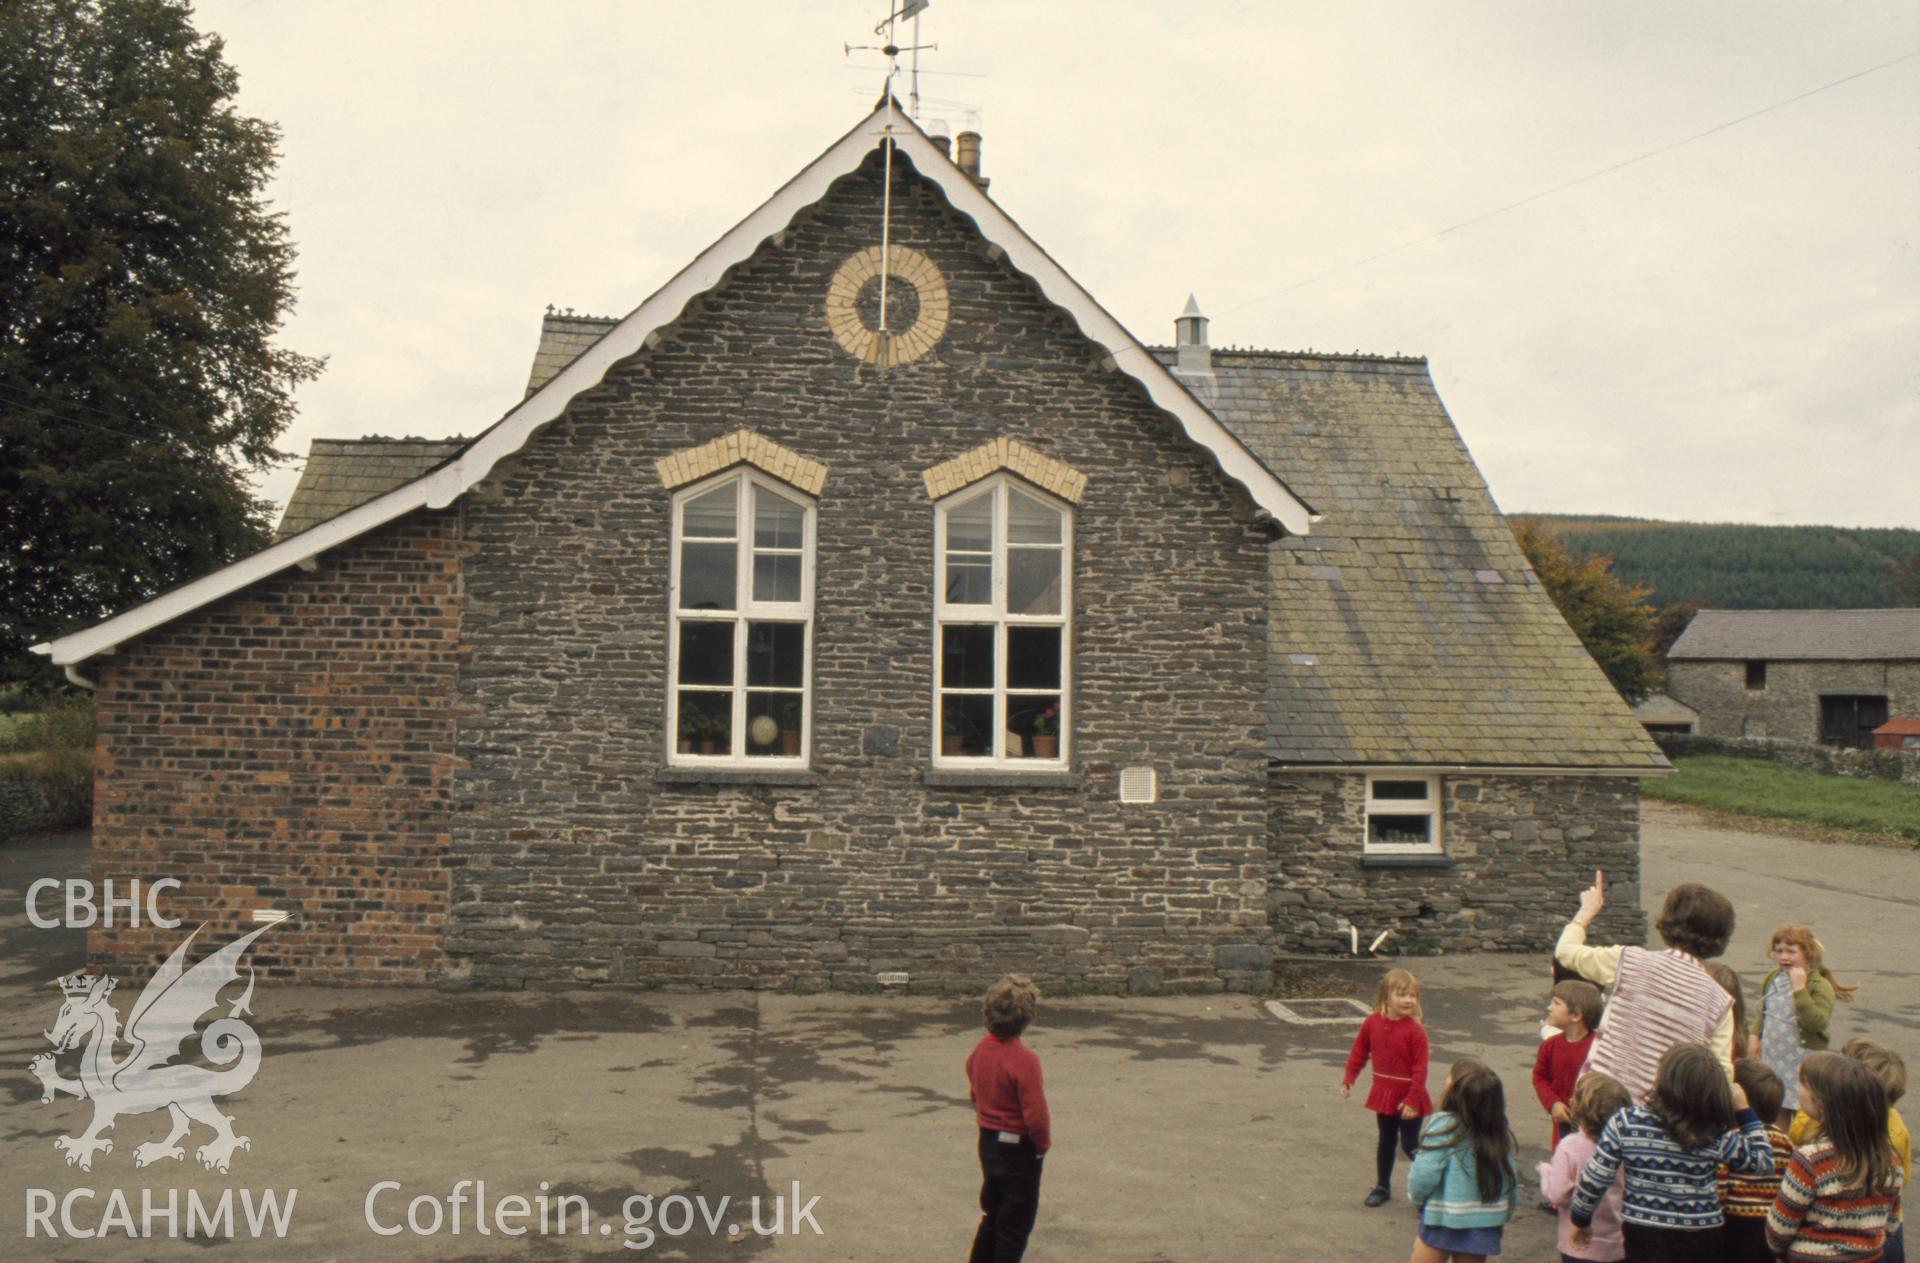 Colour photographic transparency showing Llangybi school, Ceredigion, with children playing; collated by the former Central Office of Information.